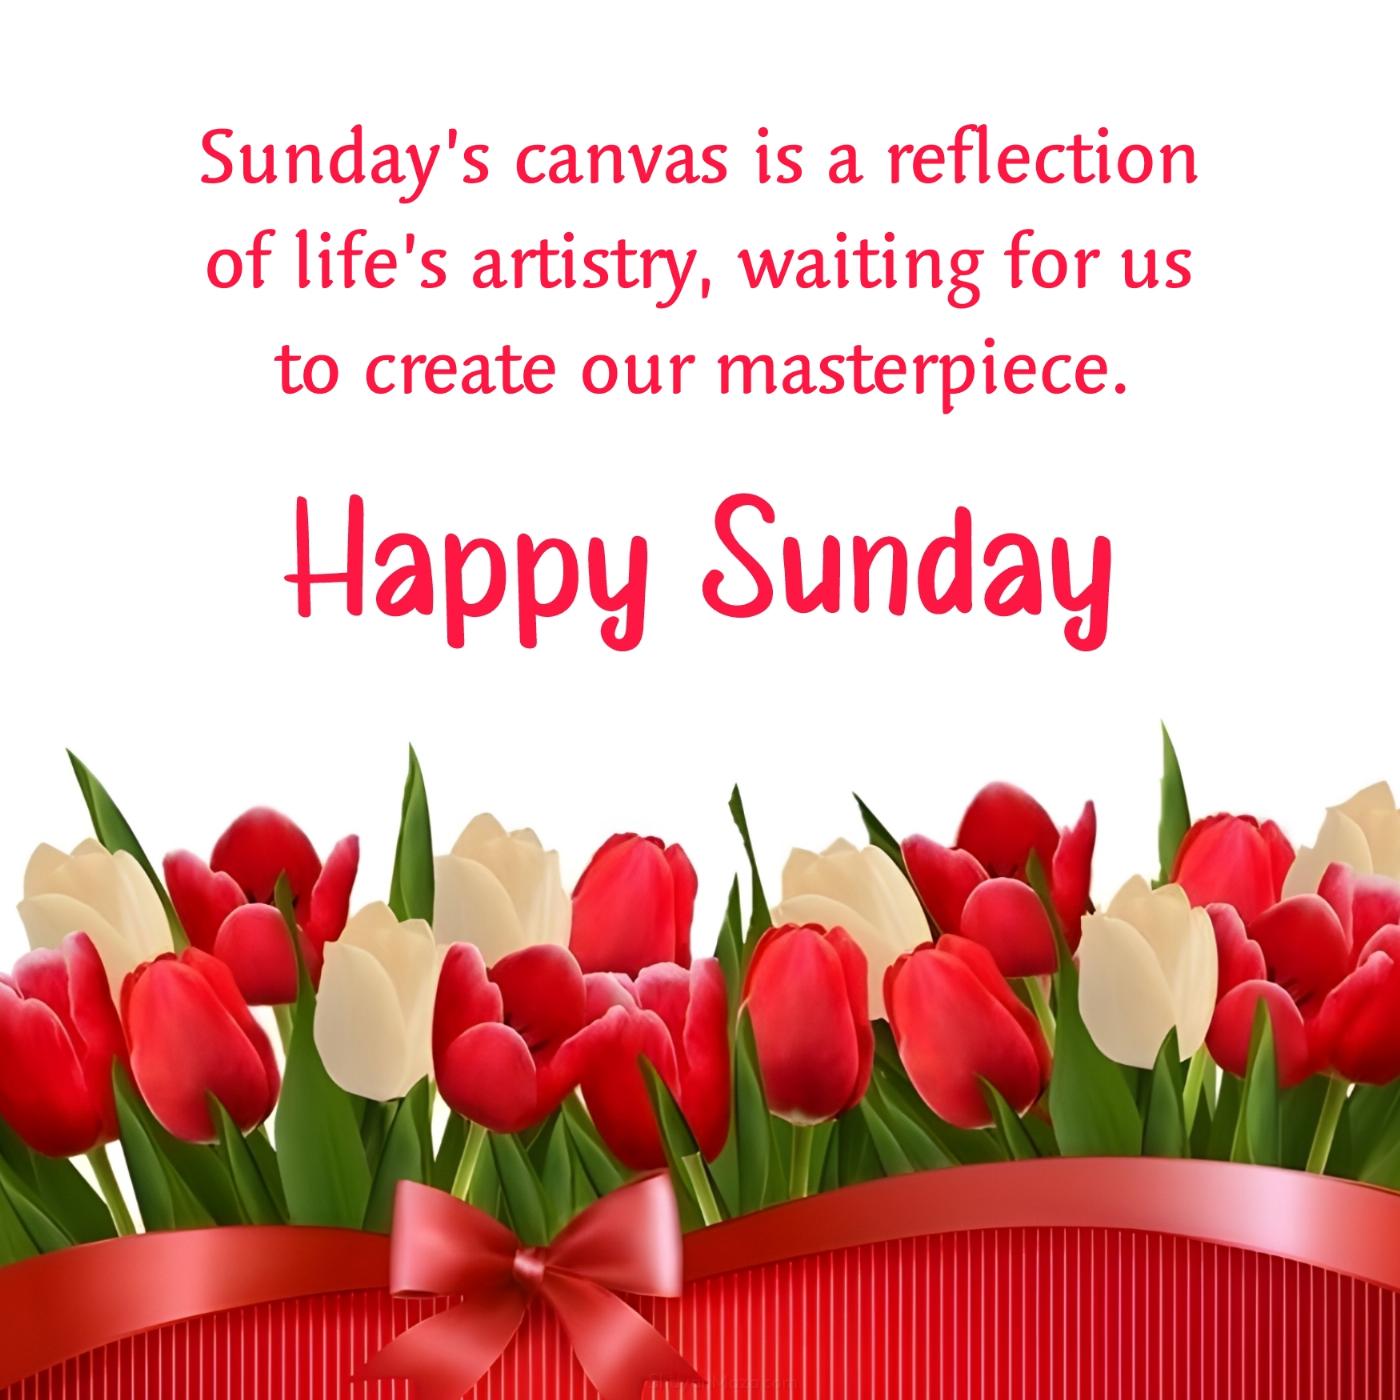 Sundays canvas is a reflection of lifes artistry waiting for us